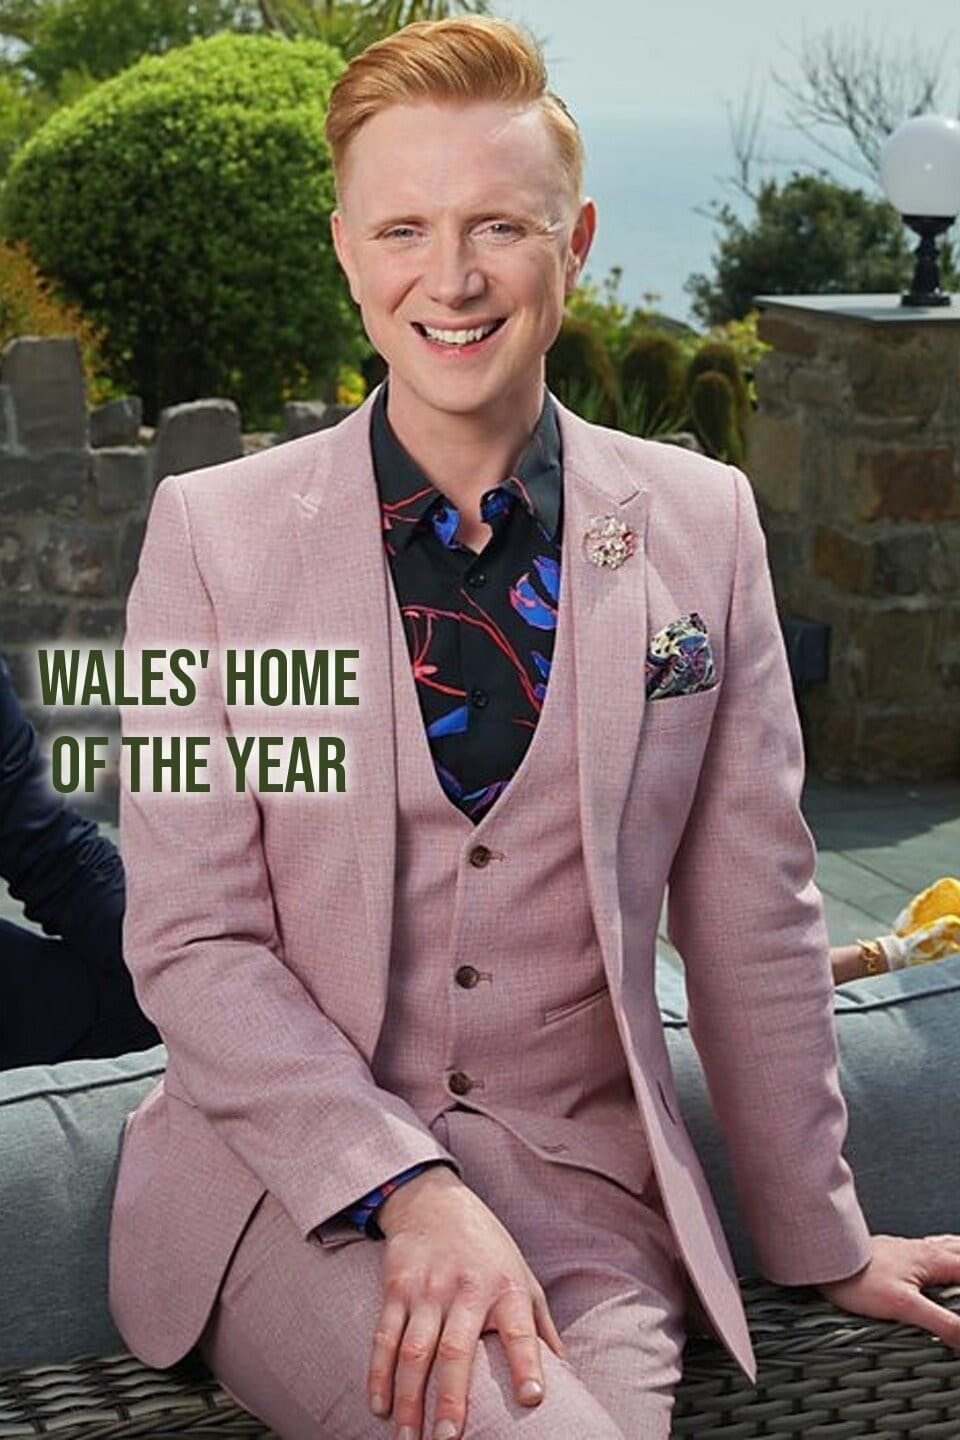 Wales' Home of the Year